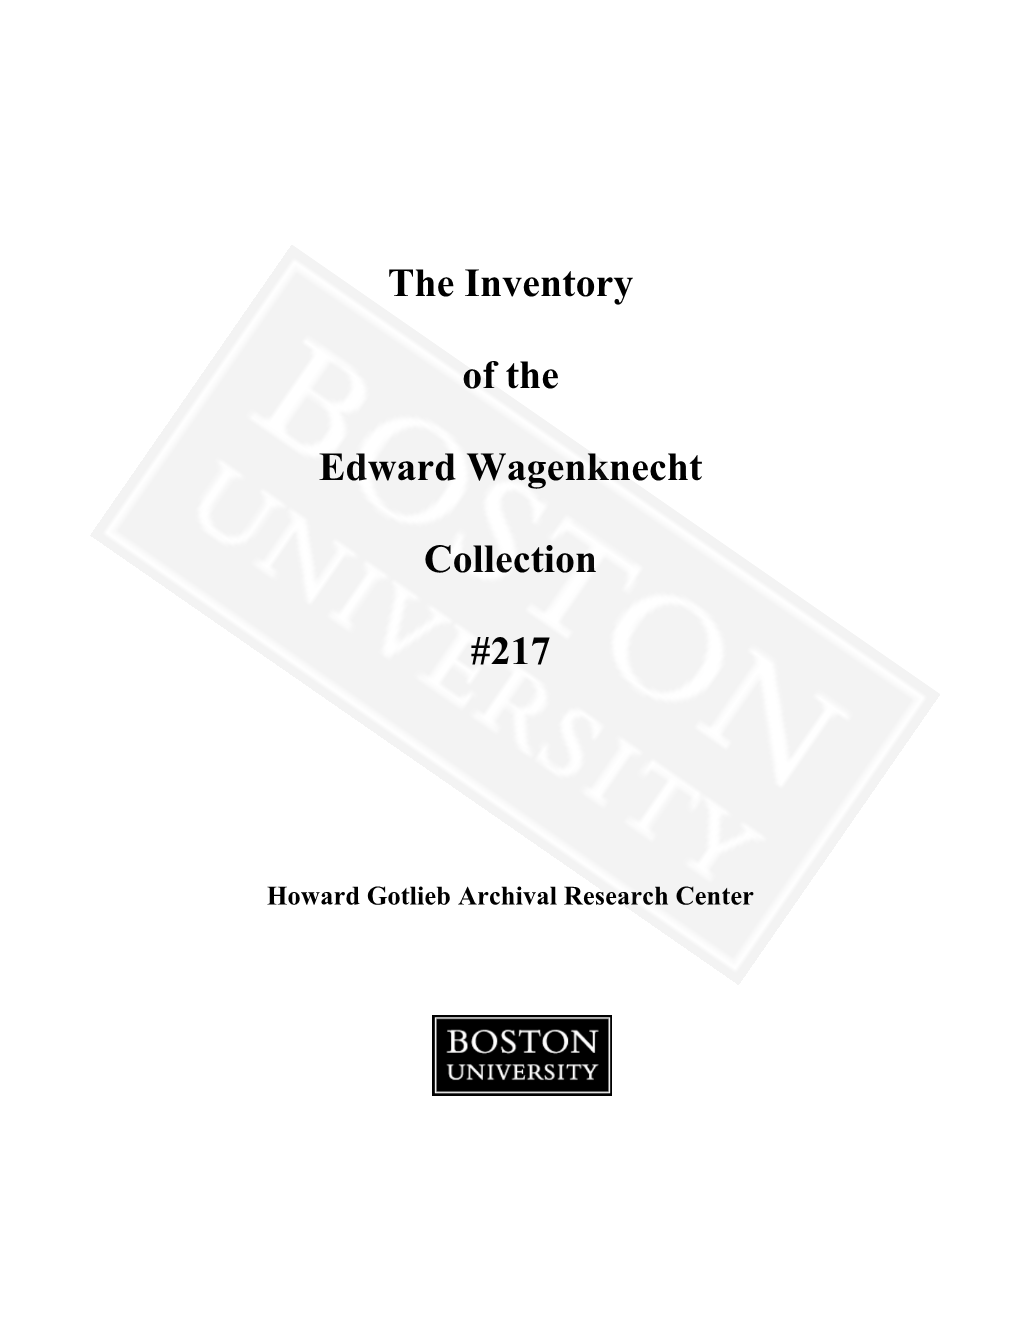 The Inventory of the Edward Wagenknecht Collection #217